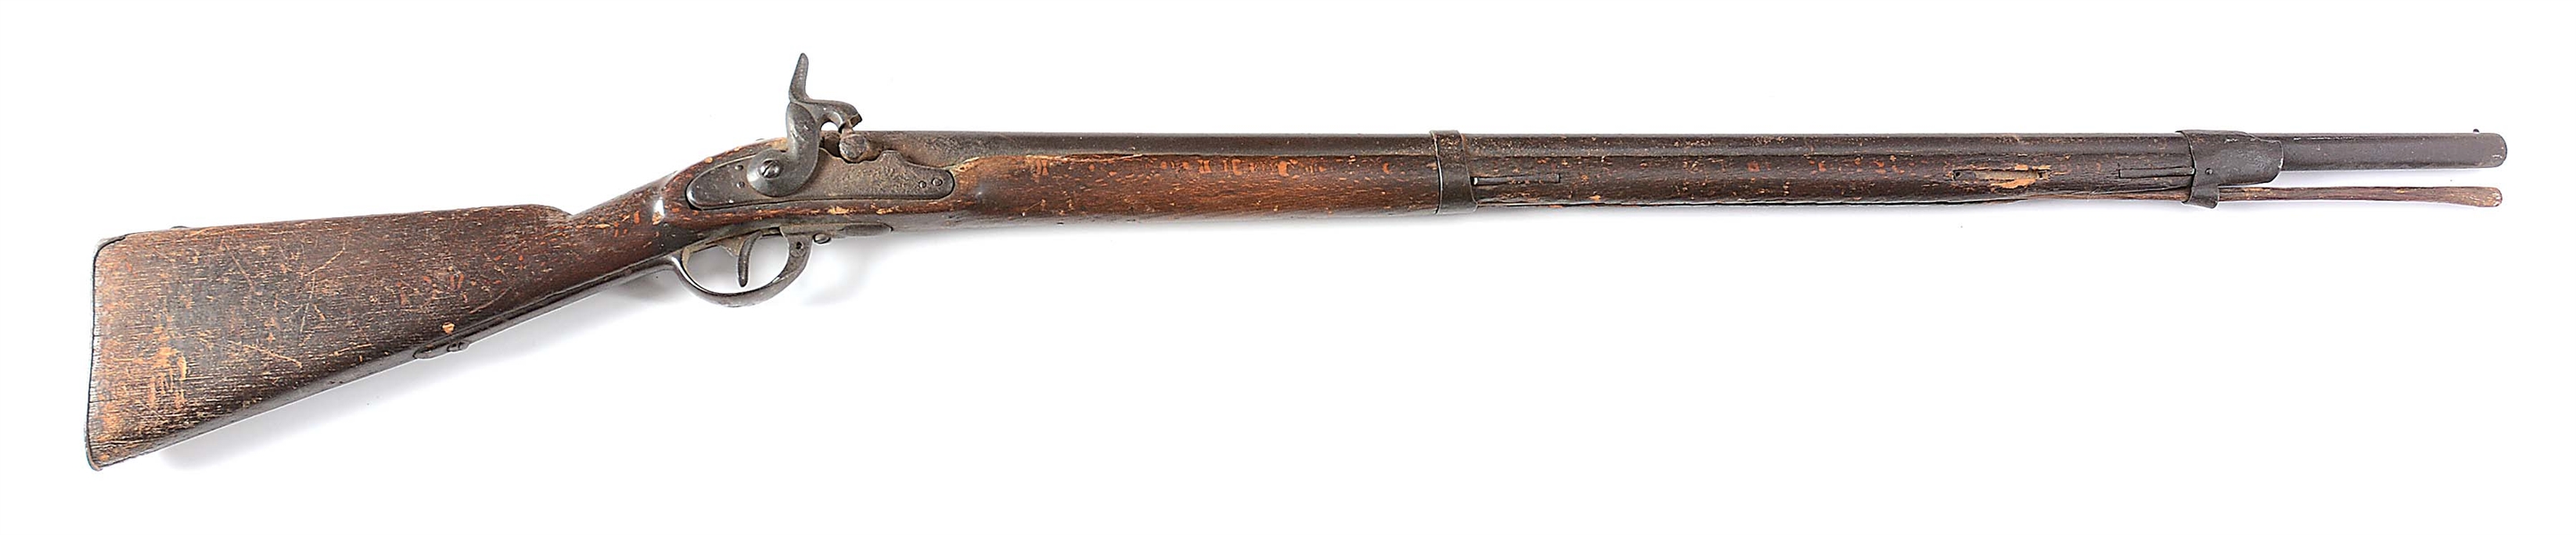 (A) CONFEDERATE ASSEMBLED AUSTRIAN MUSKET WITH CITY OF RICHMOND MARKED BARREL.